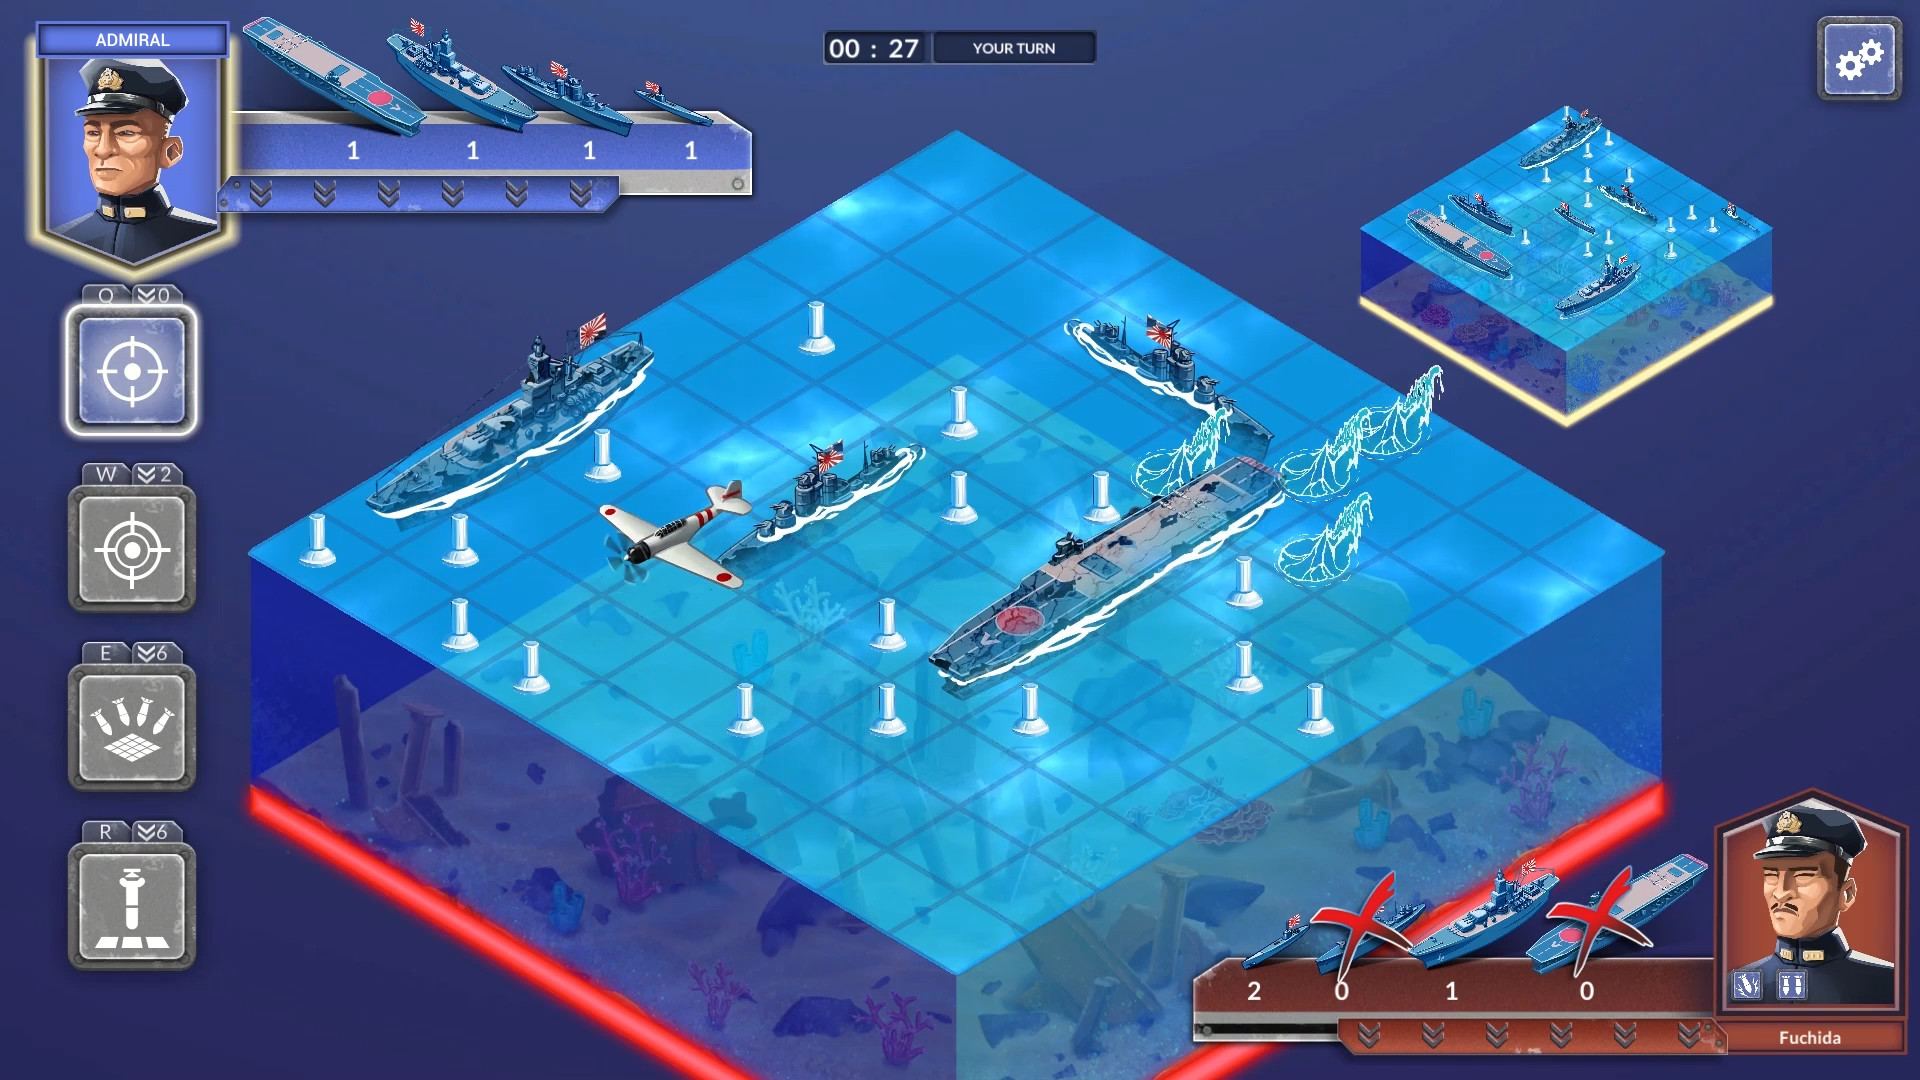 Battleships: Command of the Sea no Steam